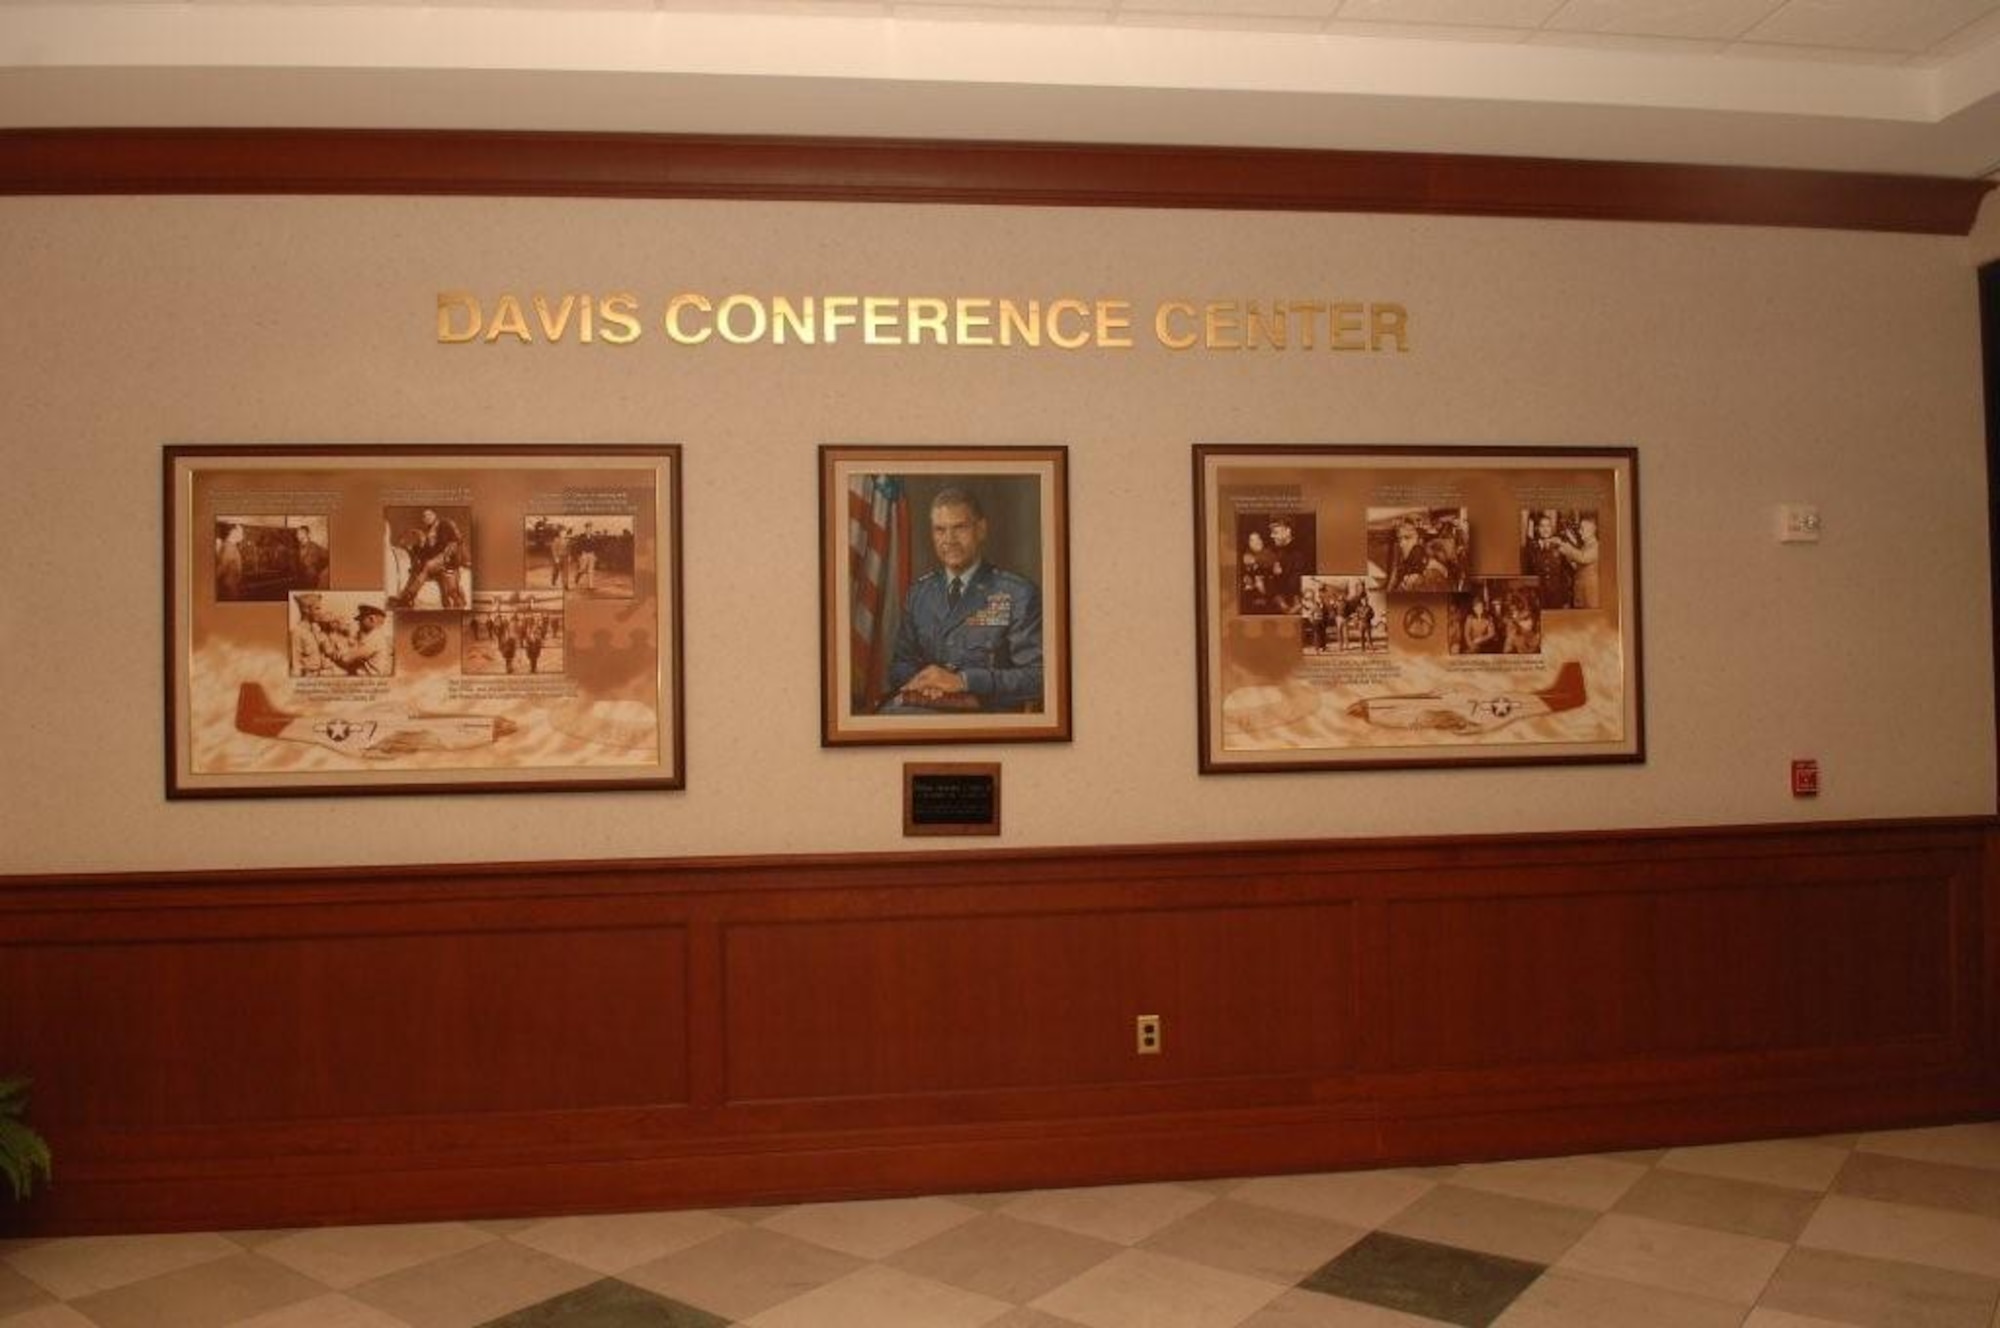 The Davis Conference Center was dedicated on Feb. 7, 2004 in honor of              General Benjamin O. Davis.